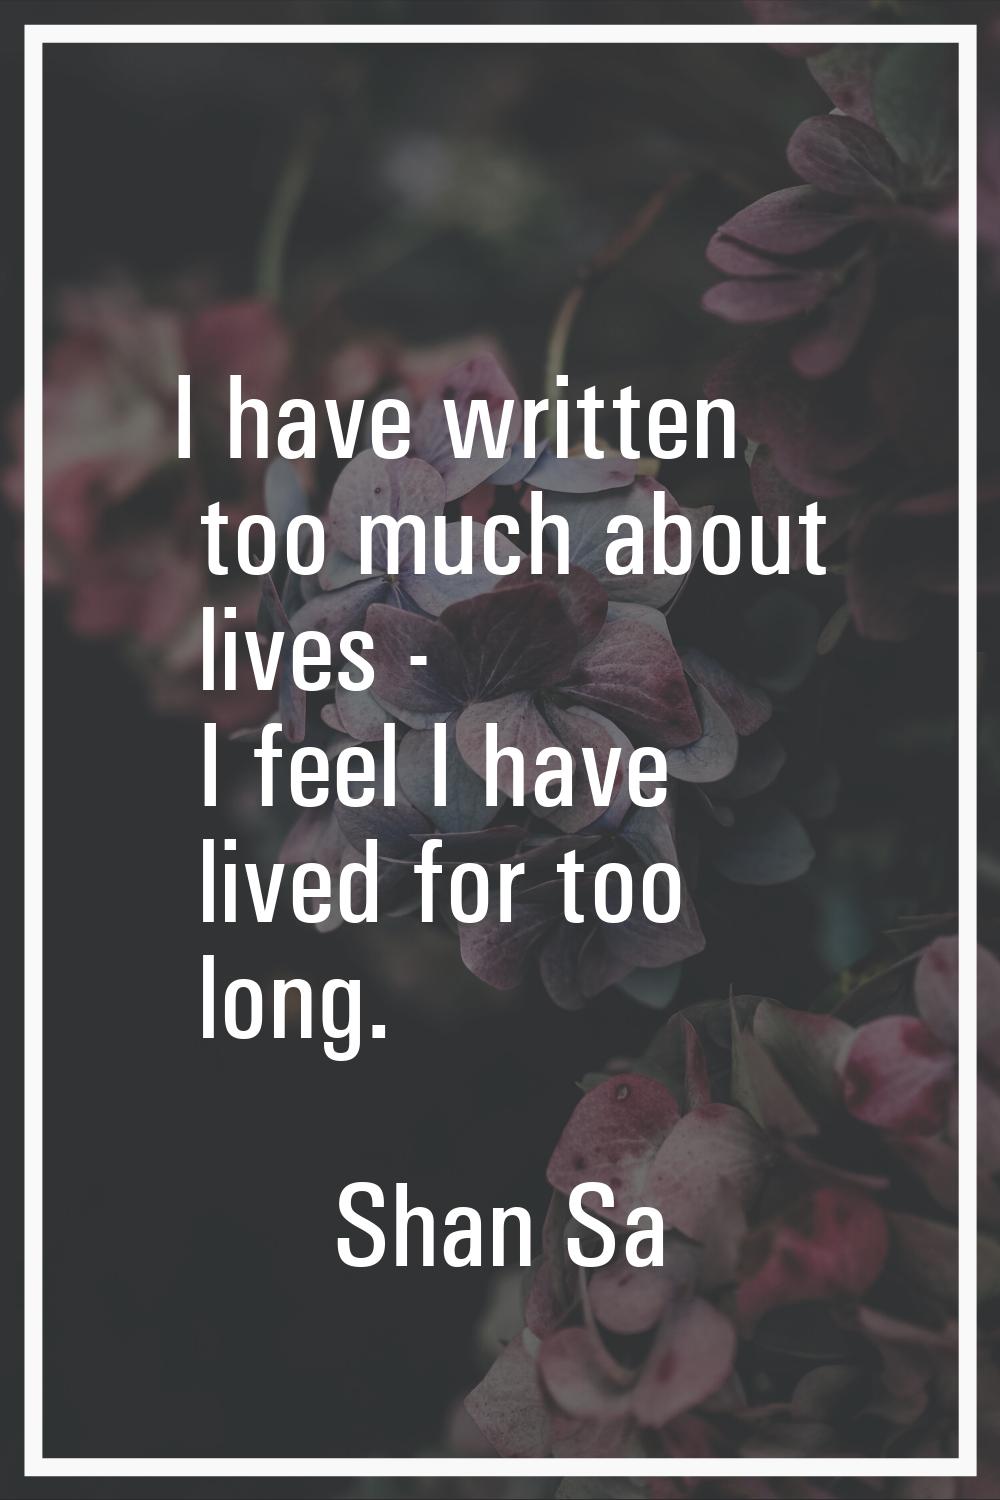 I have written too much about lives - I feel I have lived for too long.